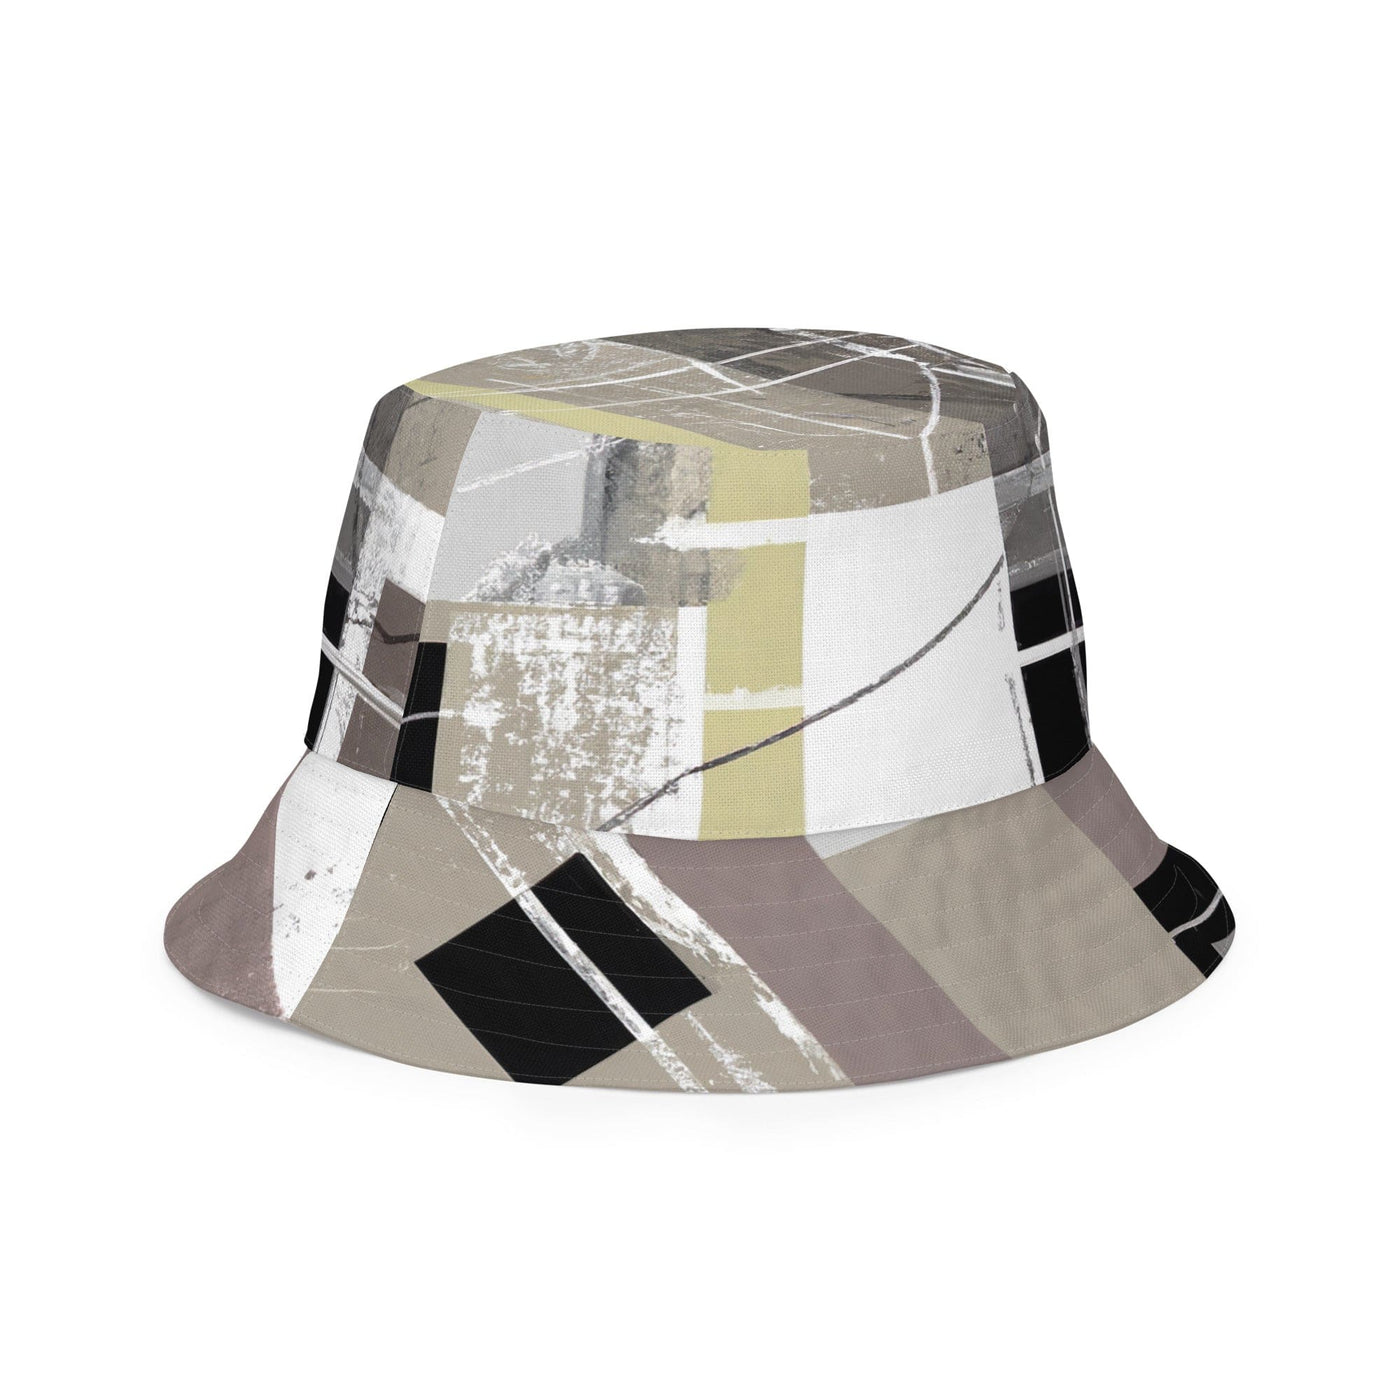 Reversible Bucket Hat Abstract Brown Geometric Shapes - Unisex / Bucket Hats